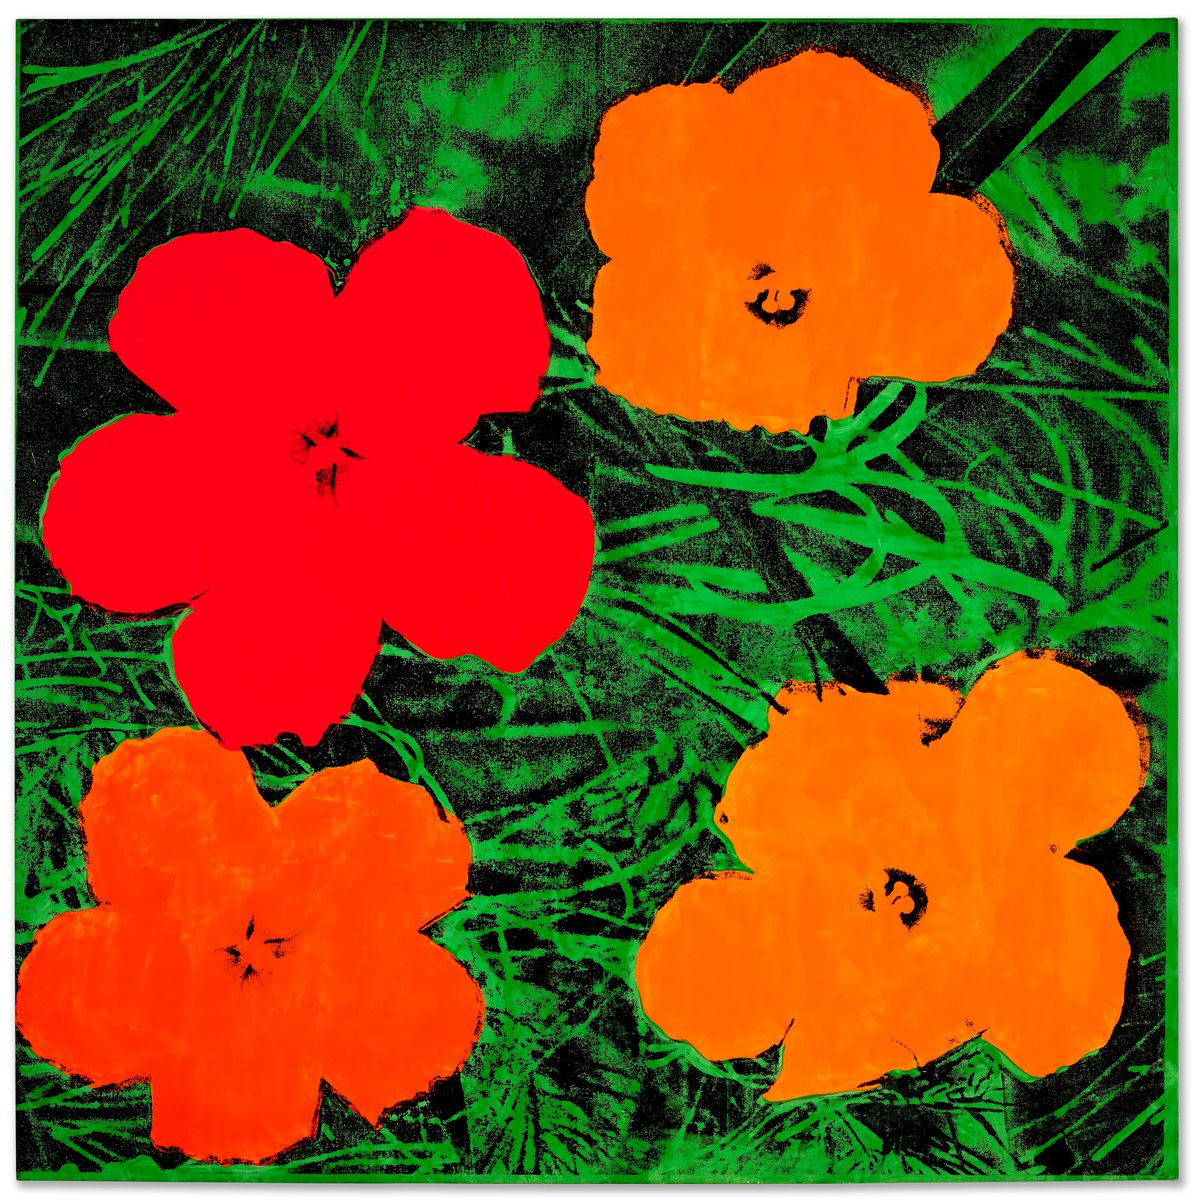 After nearly five minutes of bidding, Andy Warhol's rare 1964 painting 'Flowers', executed with day-glo paint, has sold for $35,485,000 during the #20thCenturyEveningSale.